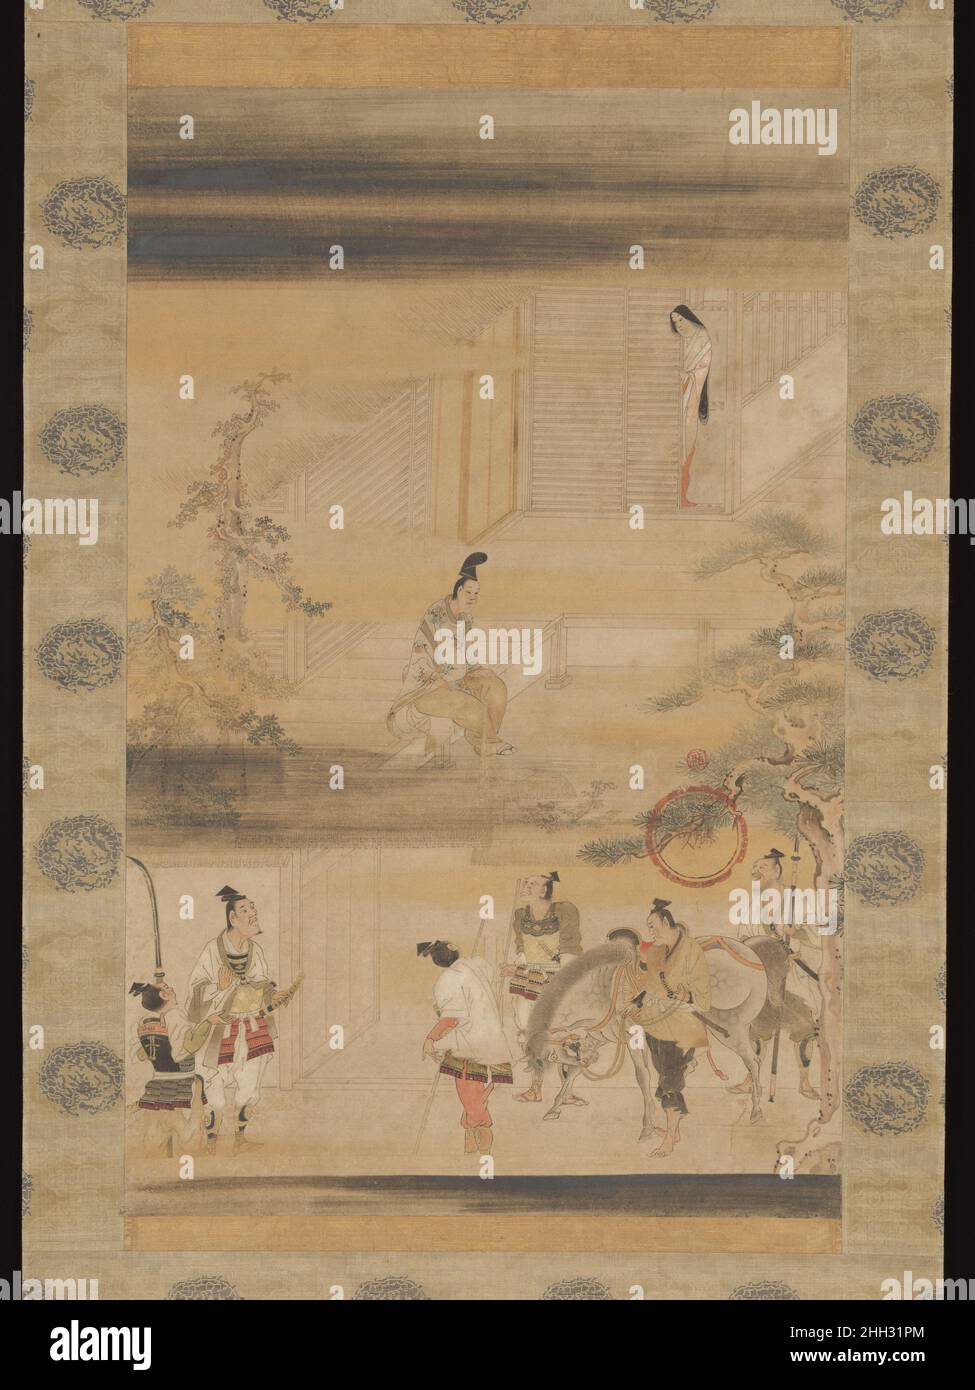 “Taira no Koremori’s Farewell,” from The Tale of the Heike (Heike monogatari) ca. 1640 Iwasa Matabei (Katsumochi) This painting pictorializes a scene from The Tale of the Heike, the great early medieval tale of war, valor, and tragic love that commemorates the Genpei War of 1180–85, which pitted the two great courtier families—the Taira (Heike clan) and Minamoto (Genji clan)—against each other. Matabei captures one of the most pivotal and poignant episodes of the entire tale, showing one of the last heirs to the Taira family’s power, Lieutenant General (Ch?j?) Koremori, bidding farewell to his Stock Photo